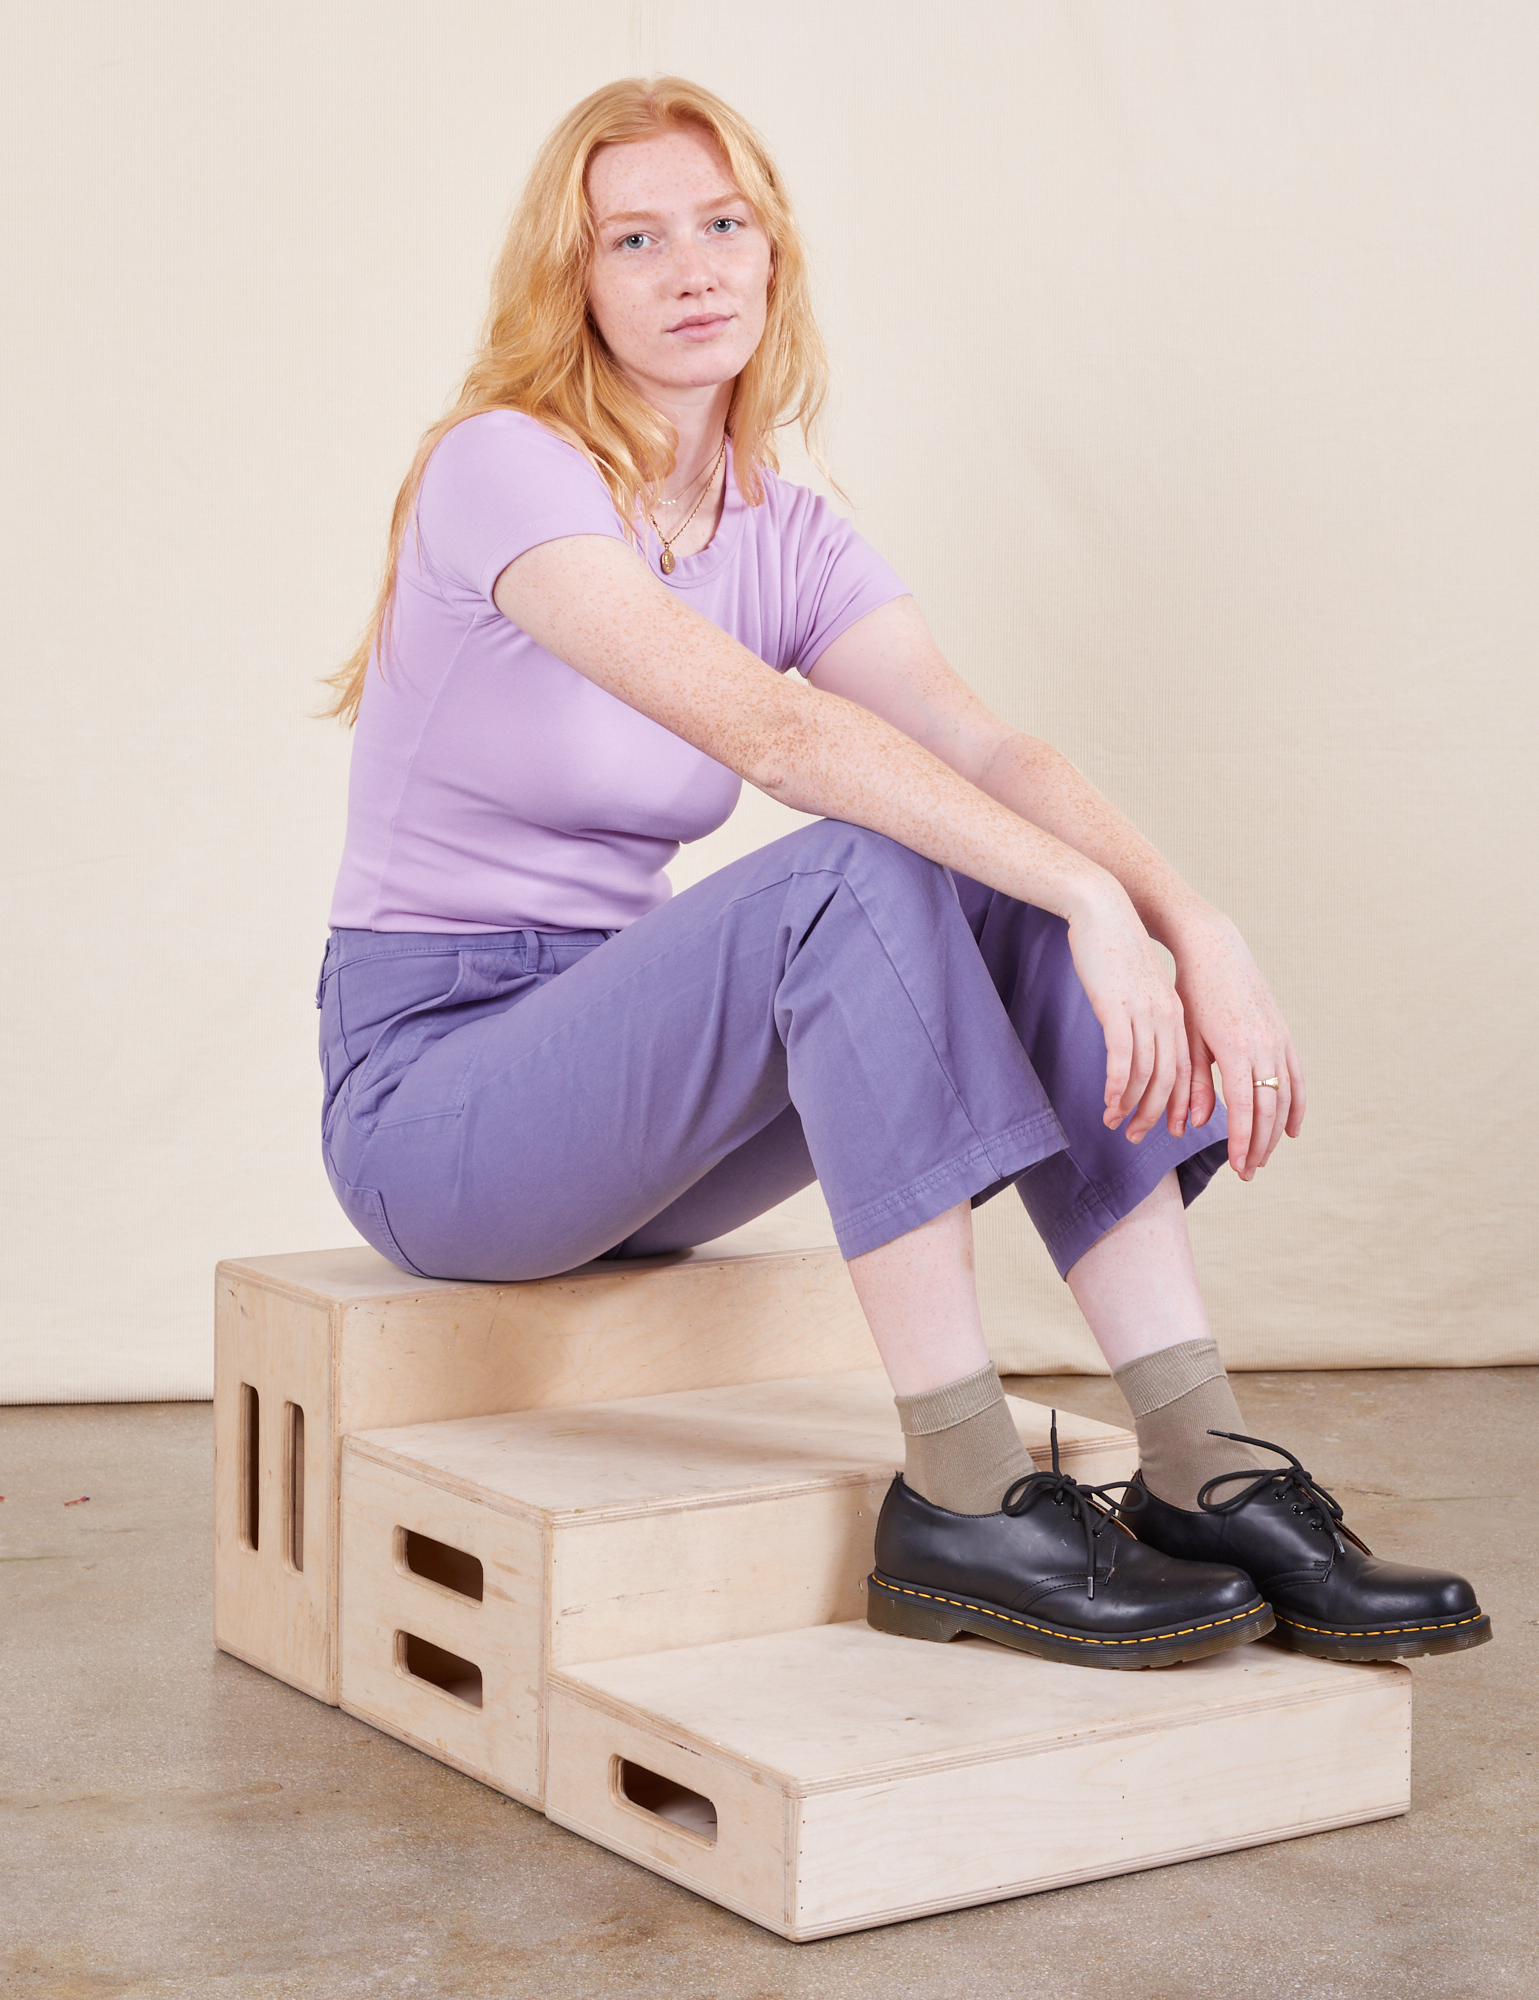 Margaret is sitting on a wooden crate wearing Work Pants in Faded Grape